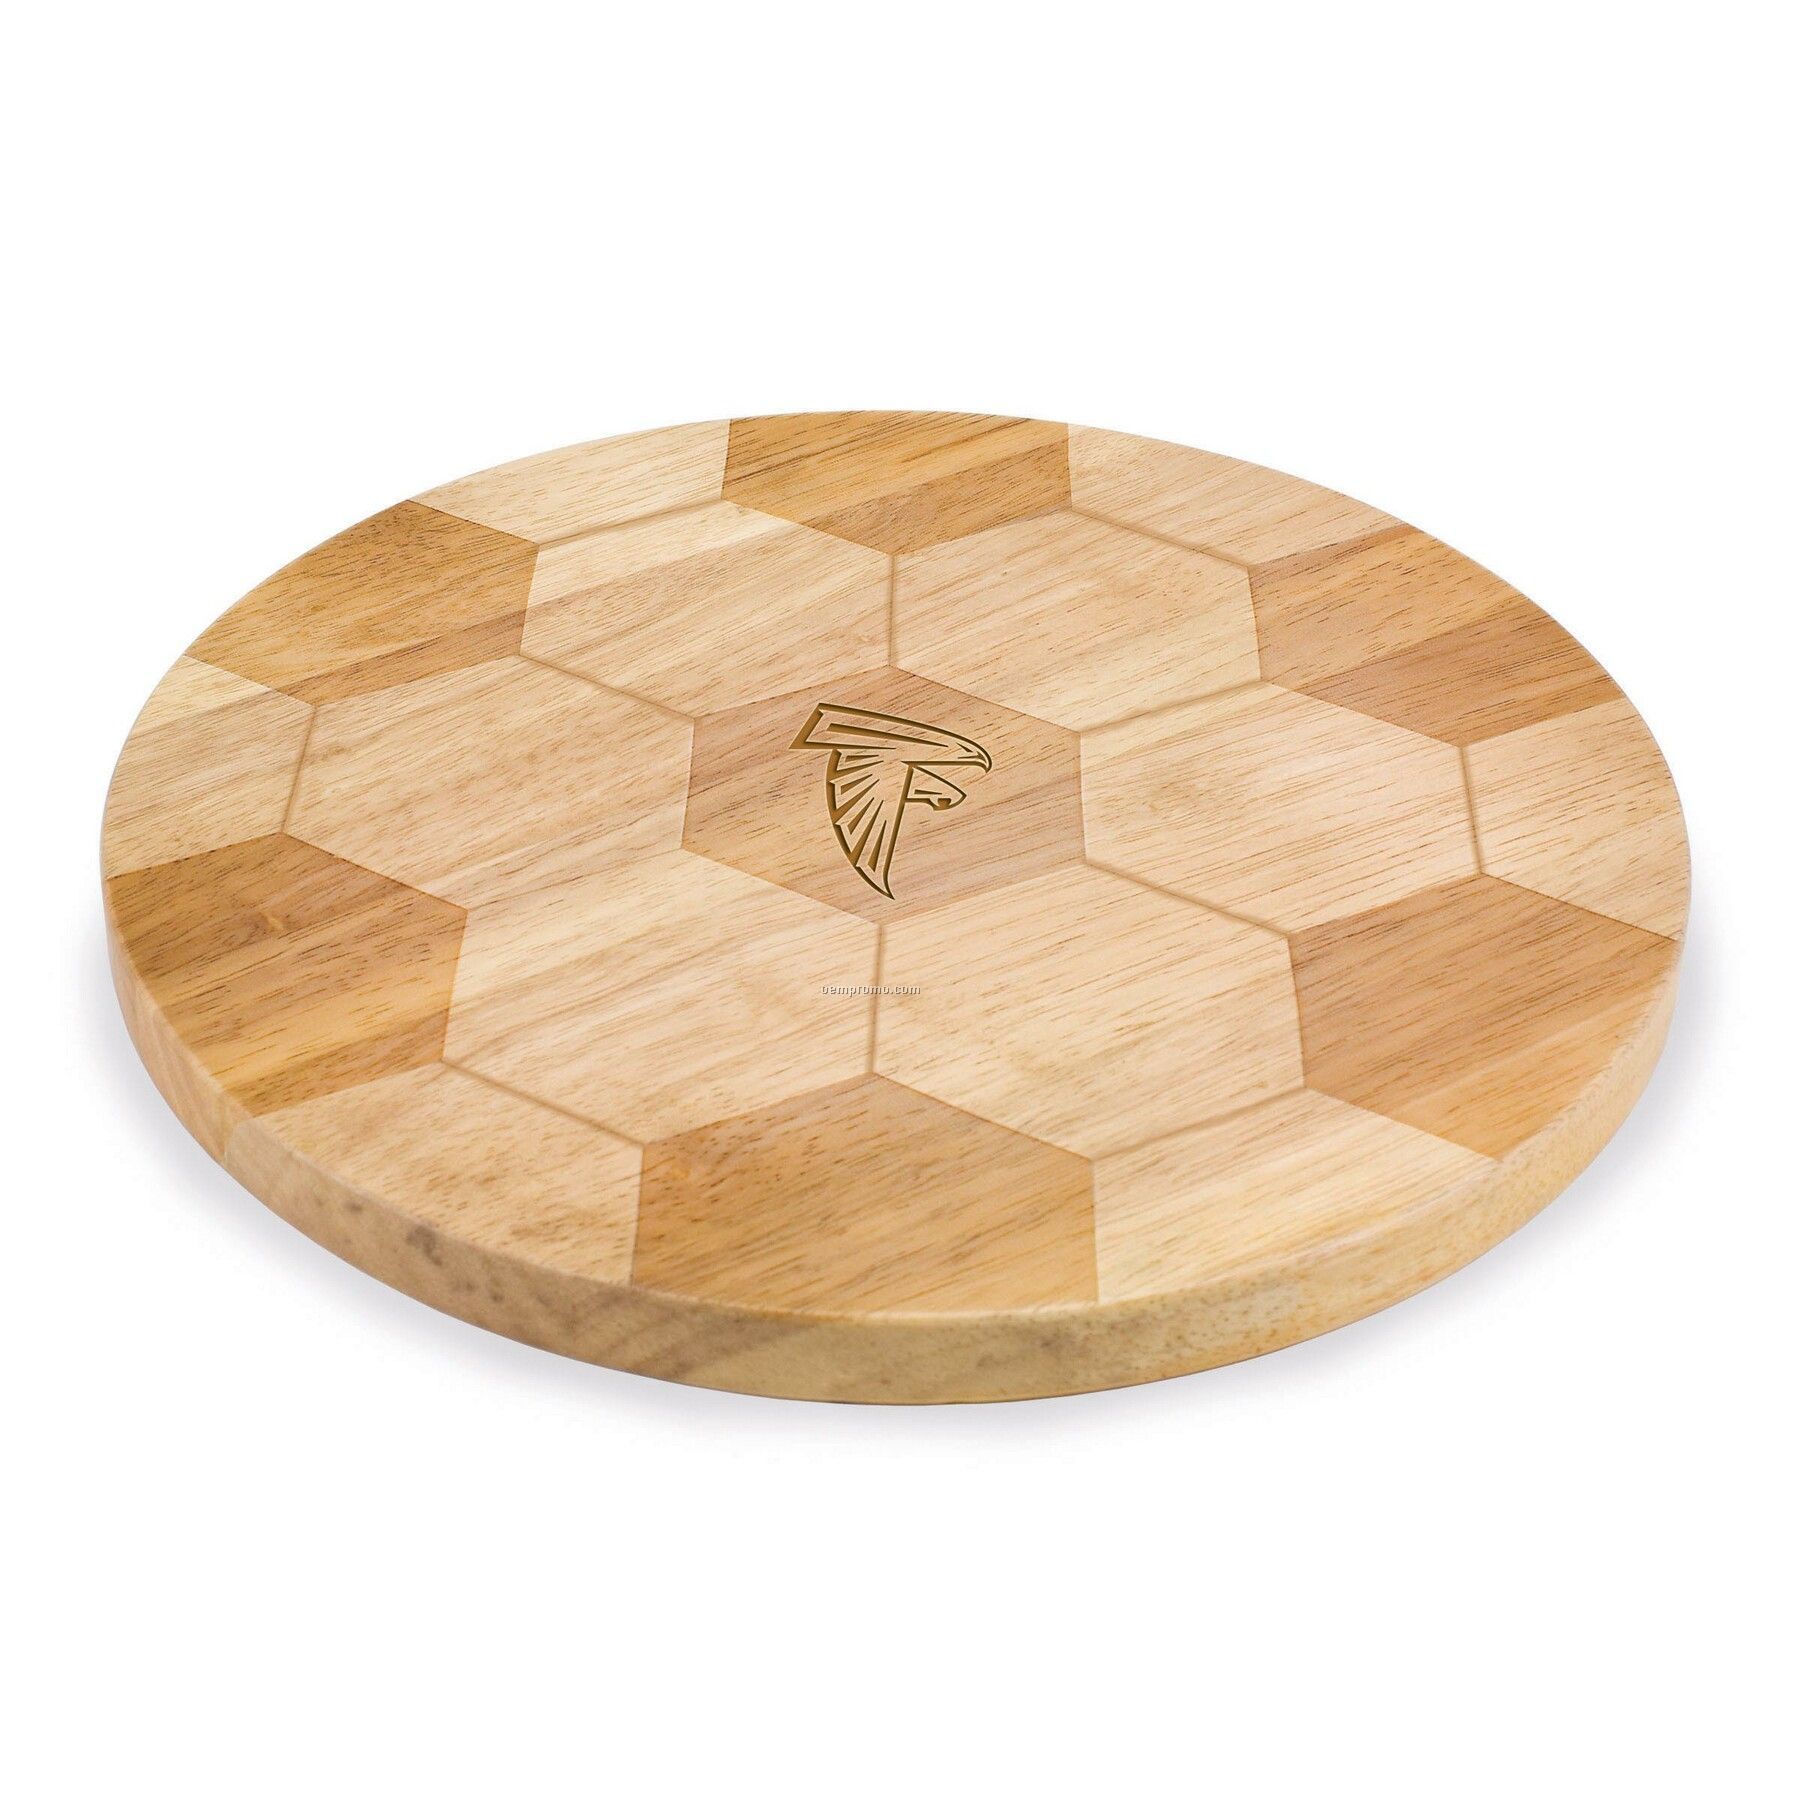 Goal Soccer Ball Shaped Wood Cutting Board / Serving Tray